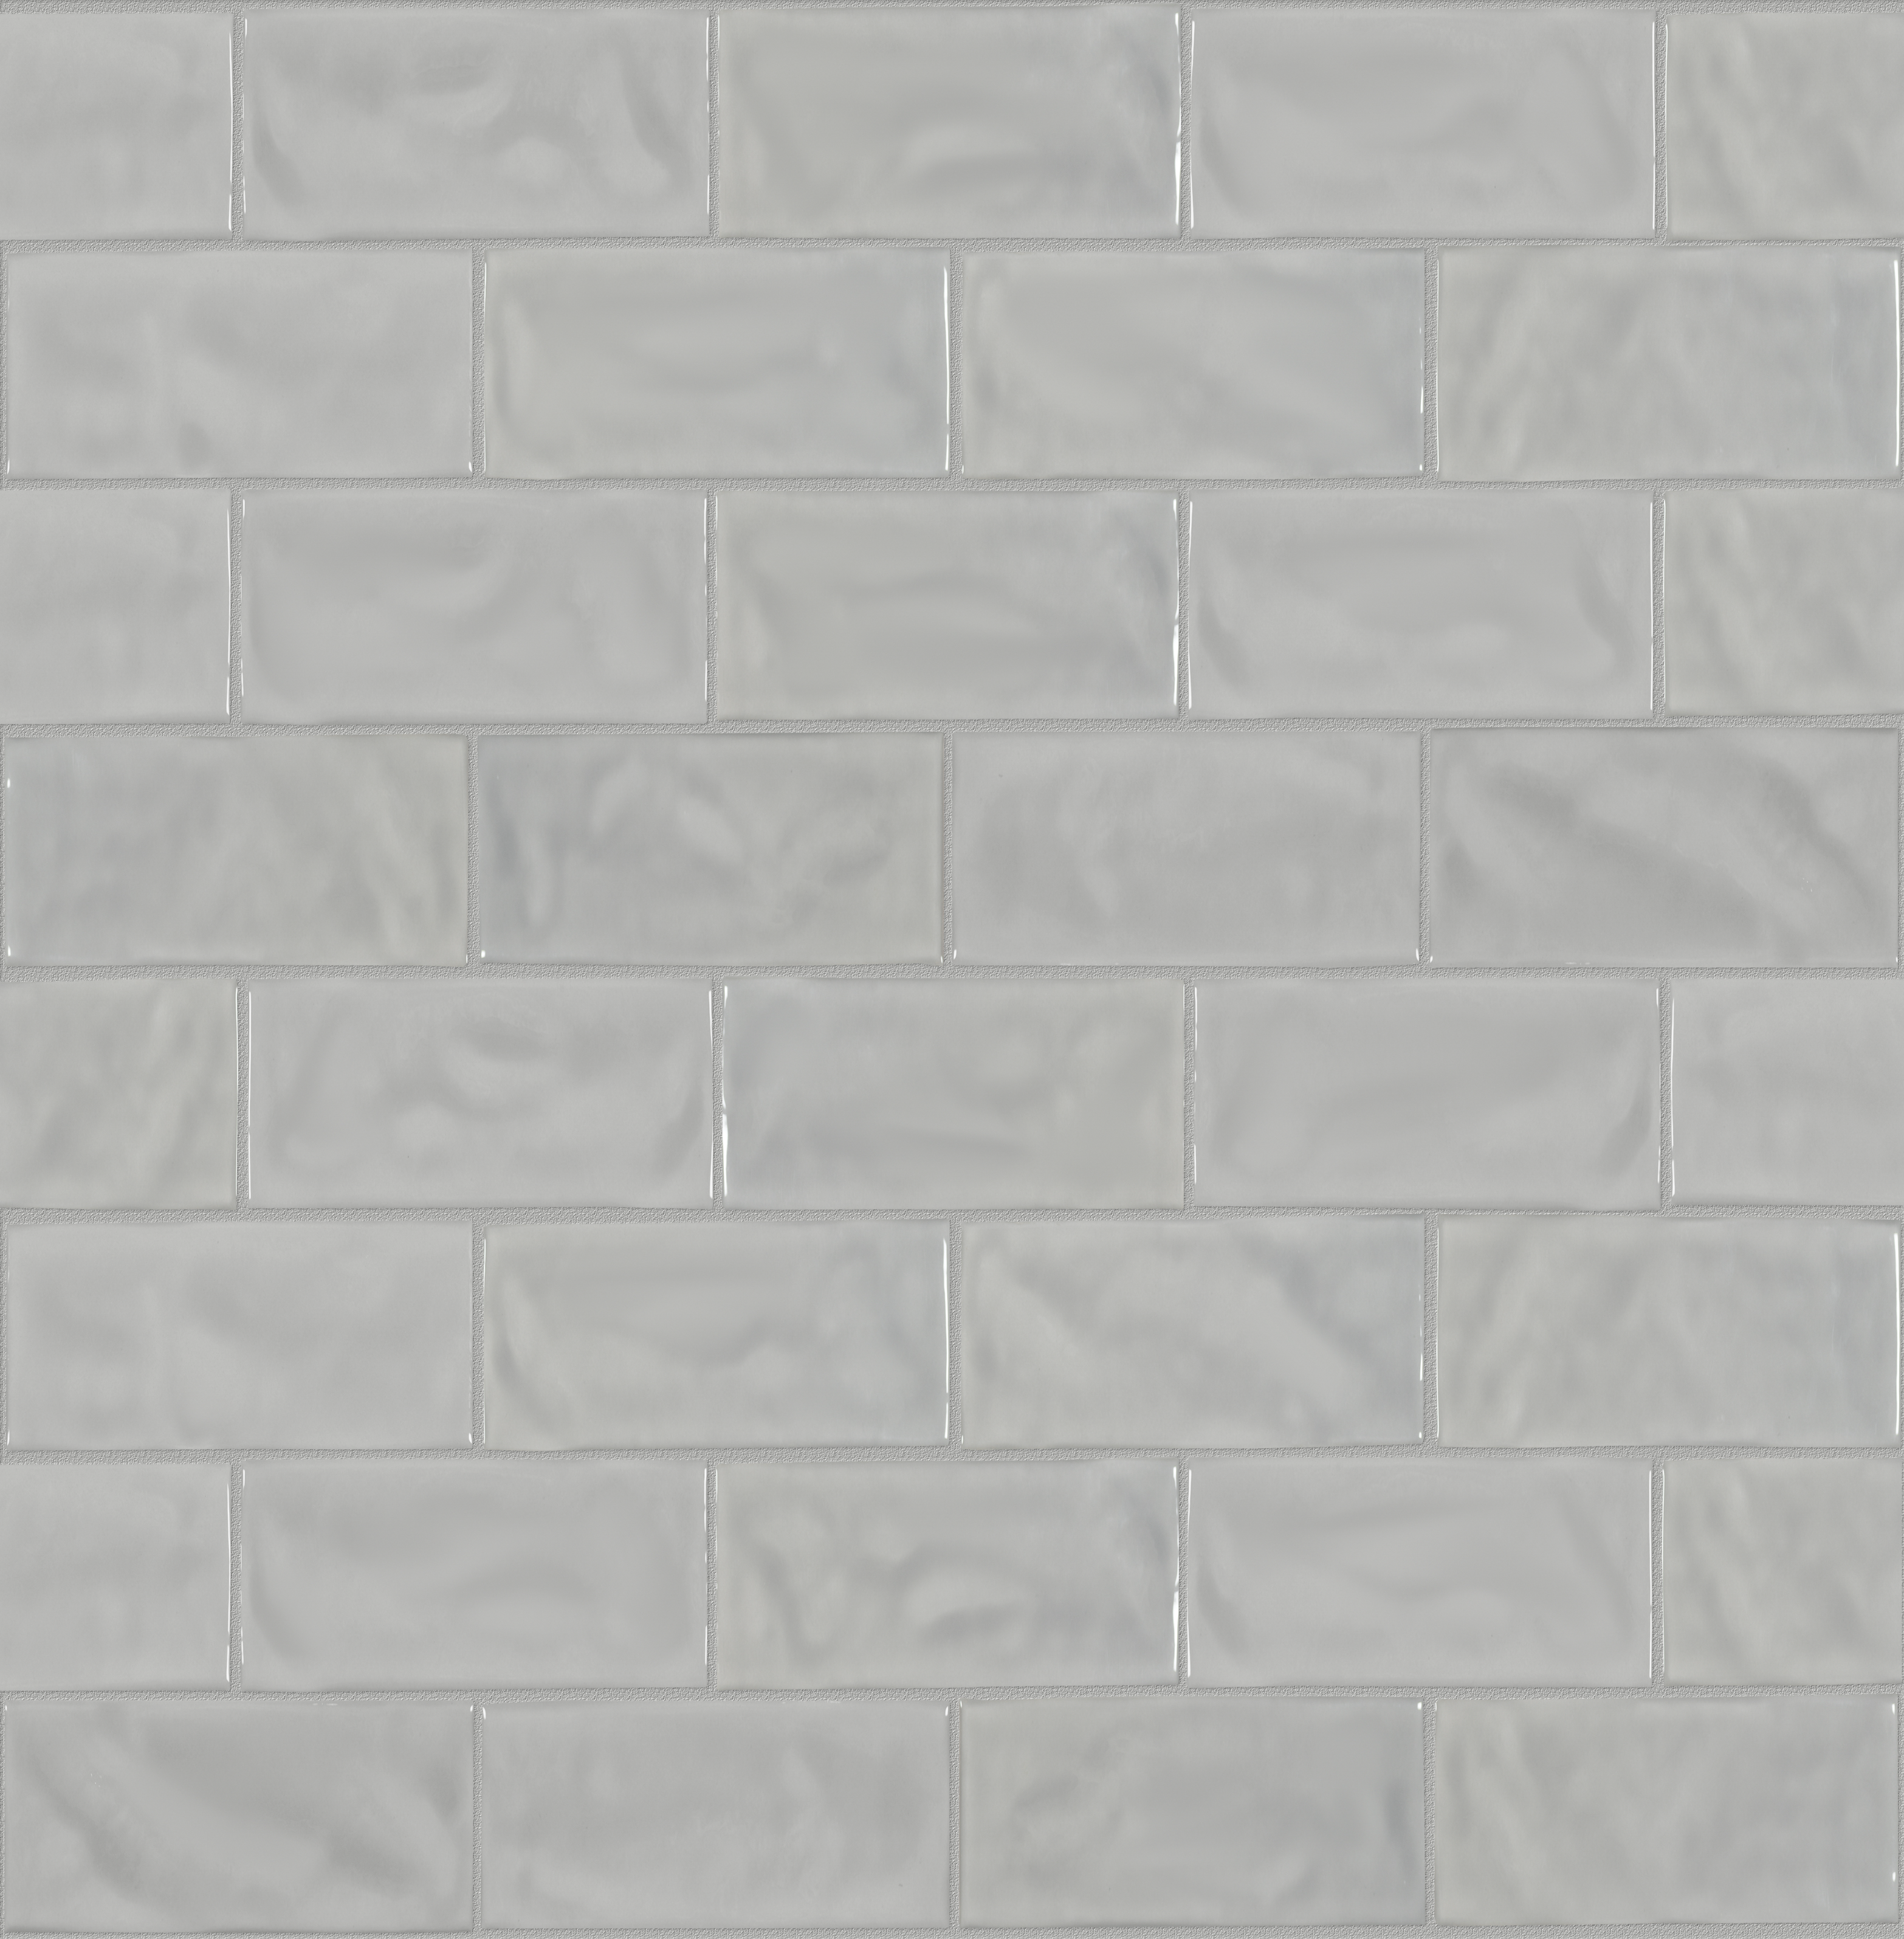 smoke pattern glazed ceramic field tile from marlow anatolia collection distributed by surface group international glossy finish pressed edge 3x6 rectangle shape